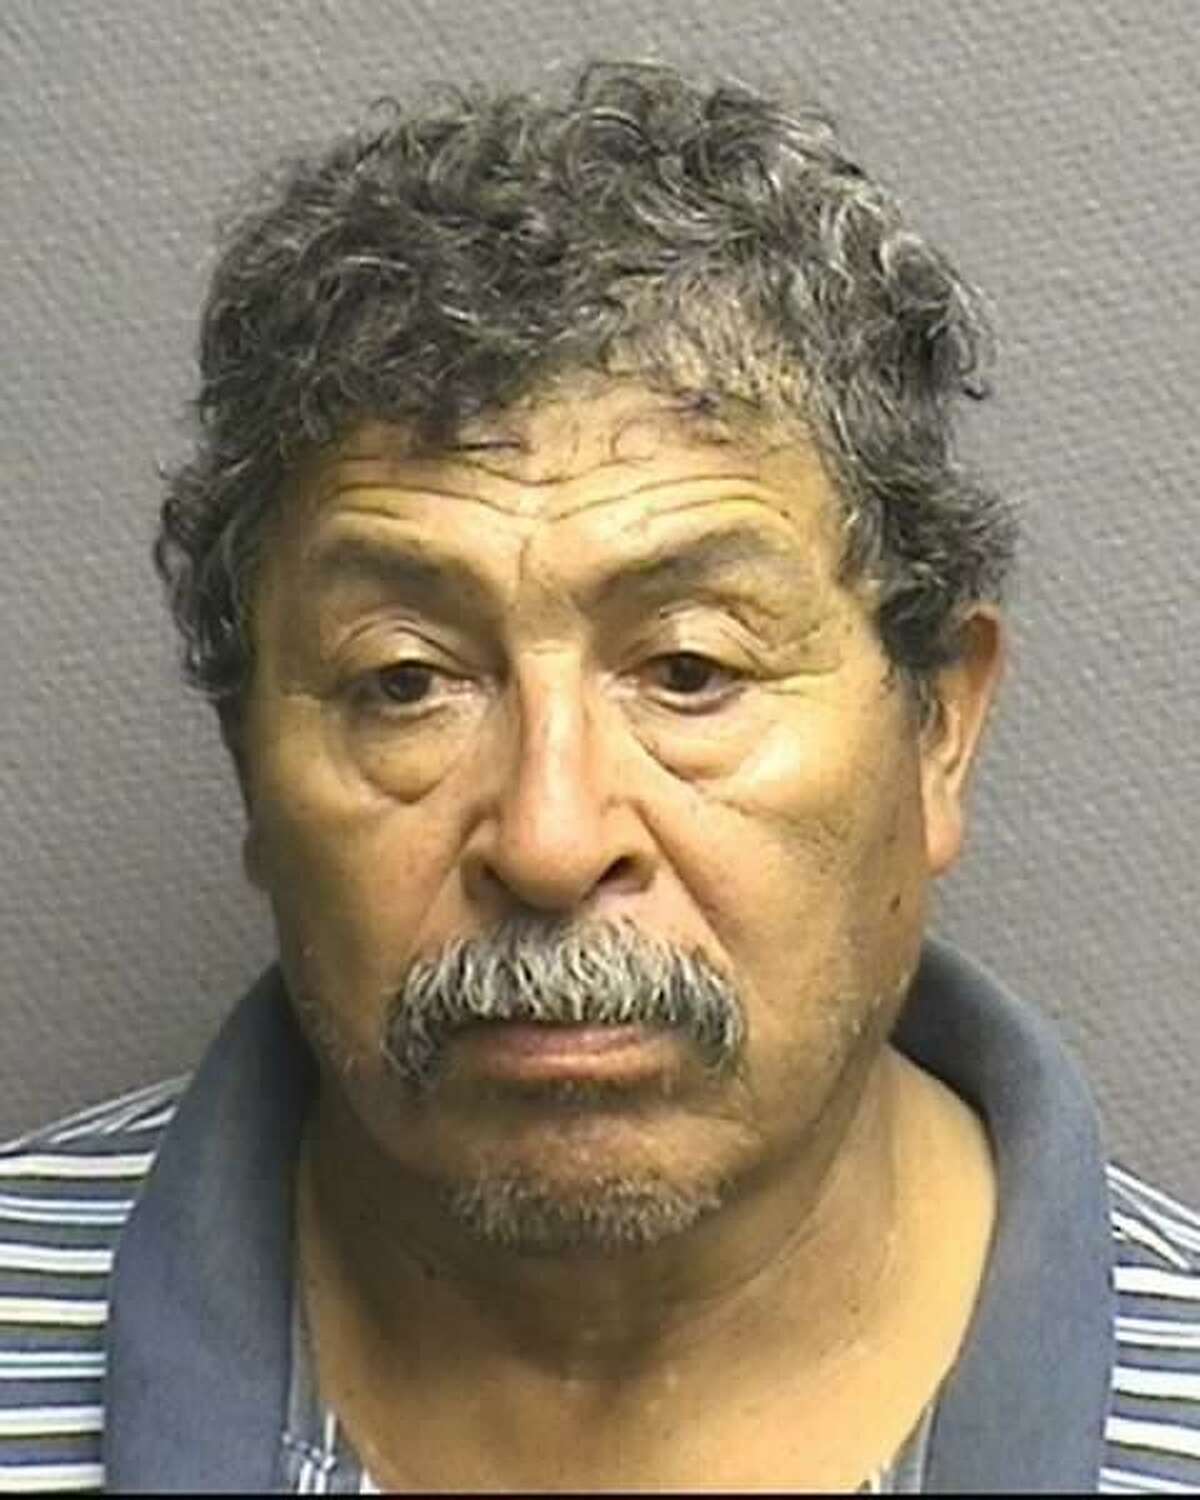 Francisco Amaya, is wanted by Houston Crime Stoppers on a charge of, DWI 3rd offense.